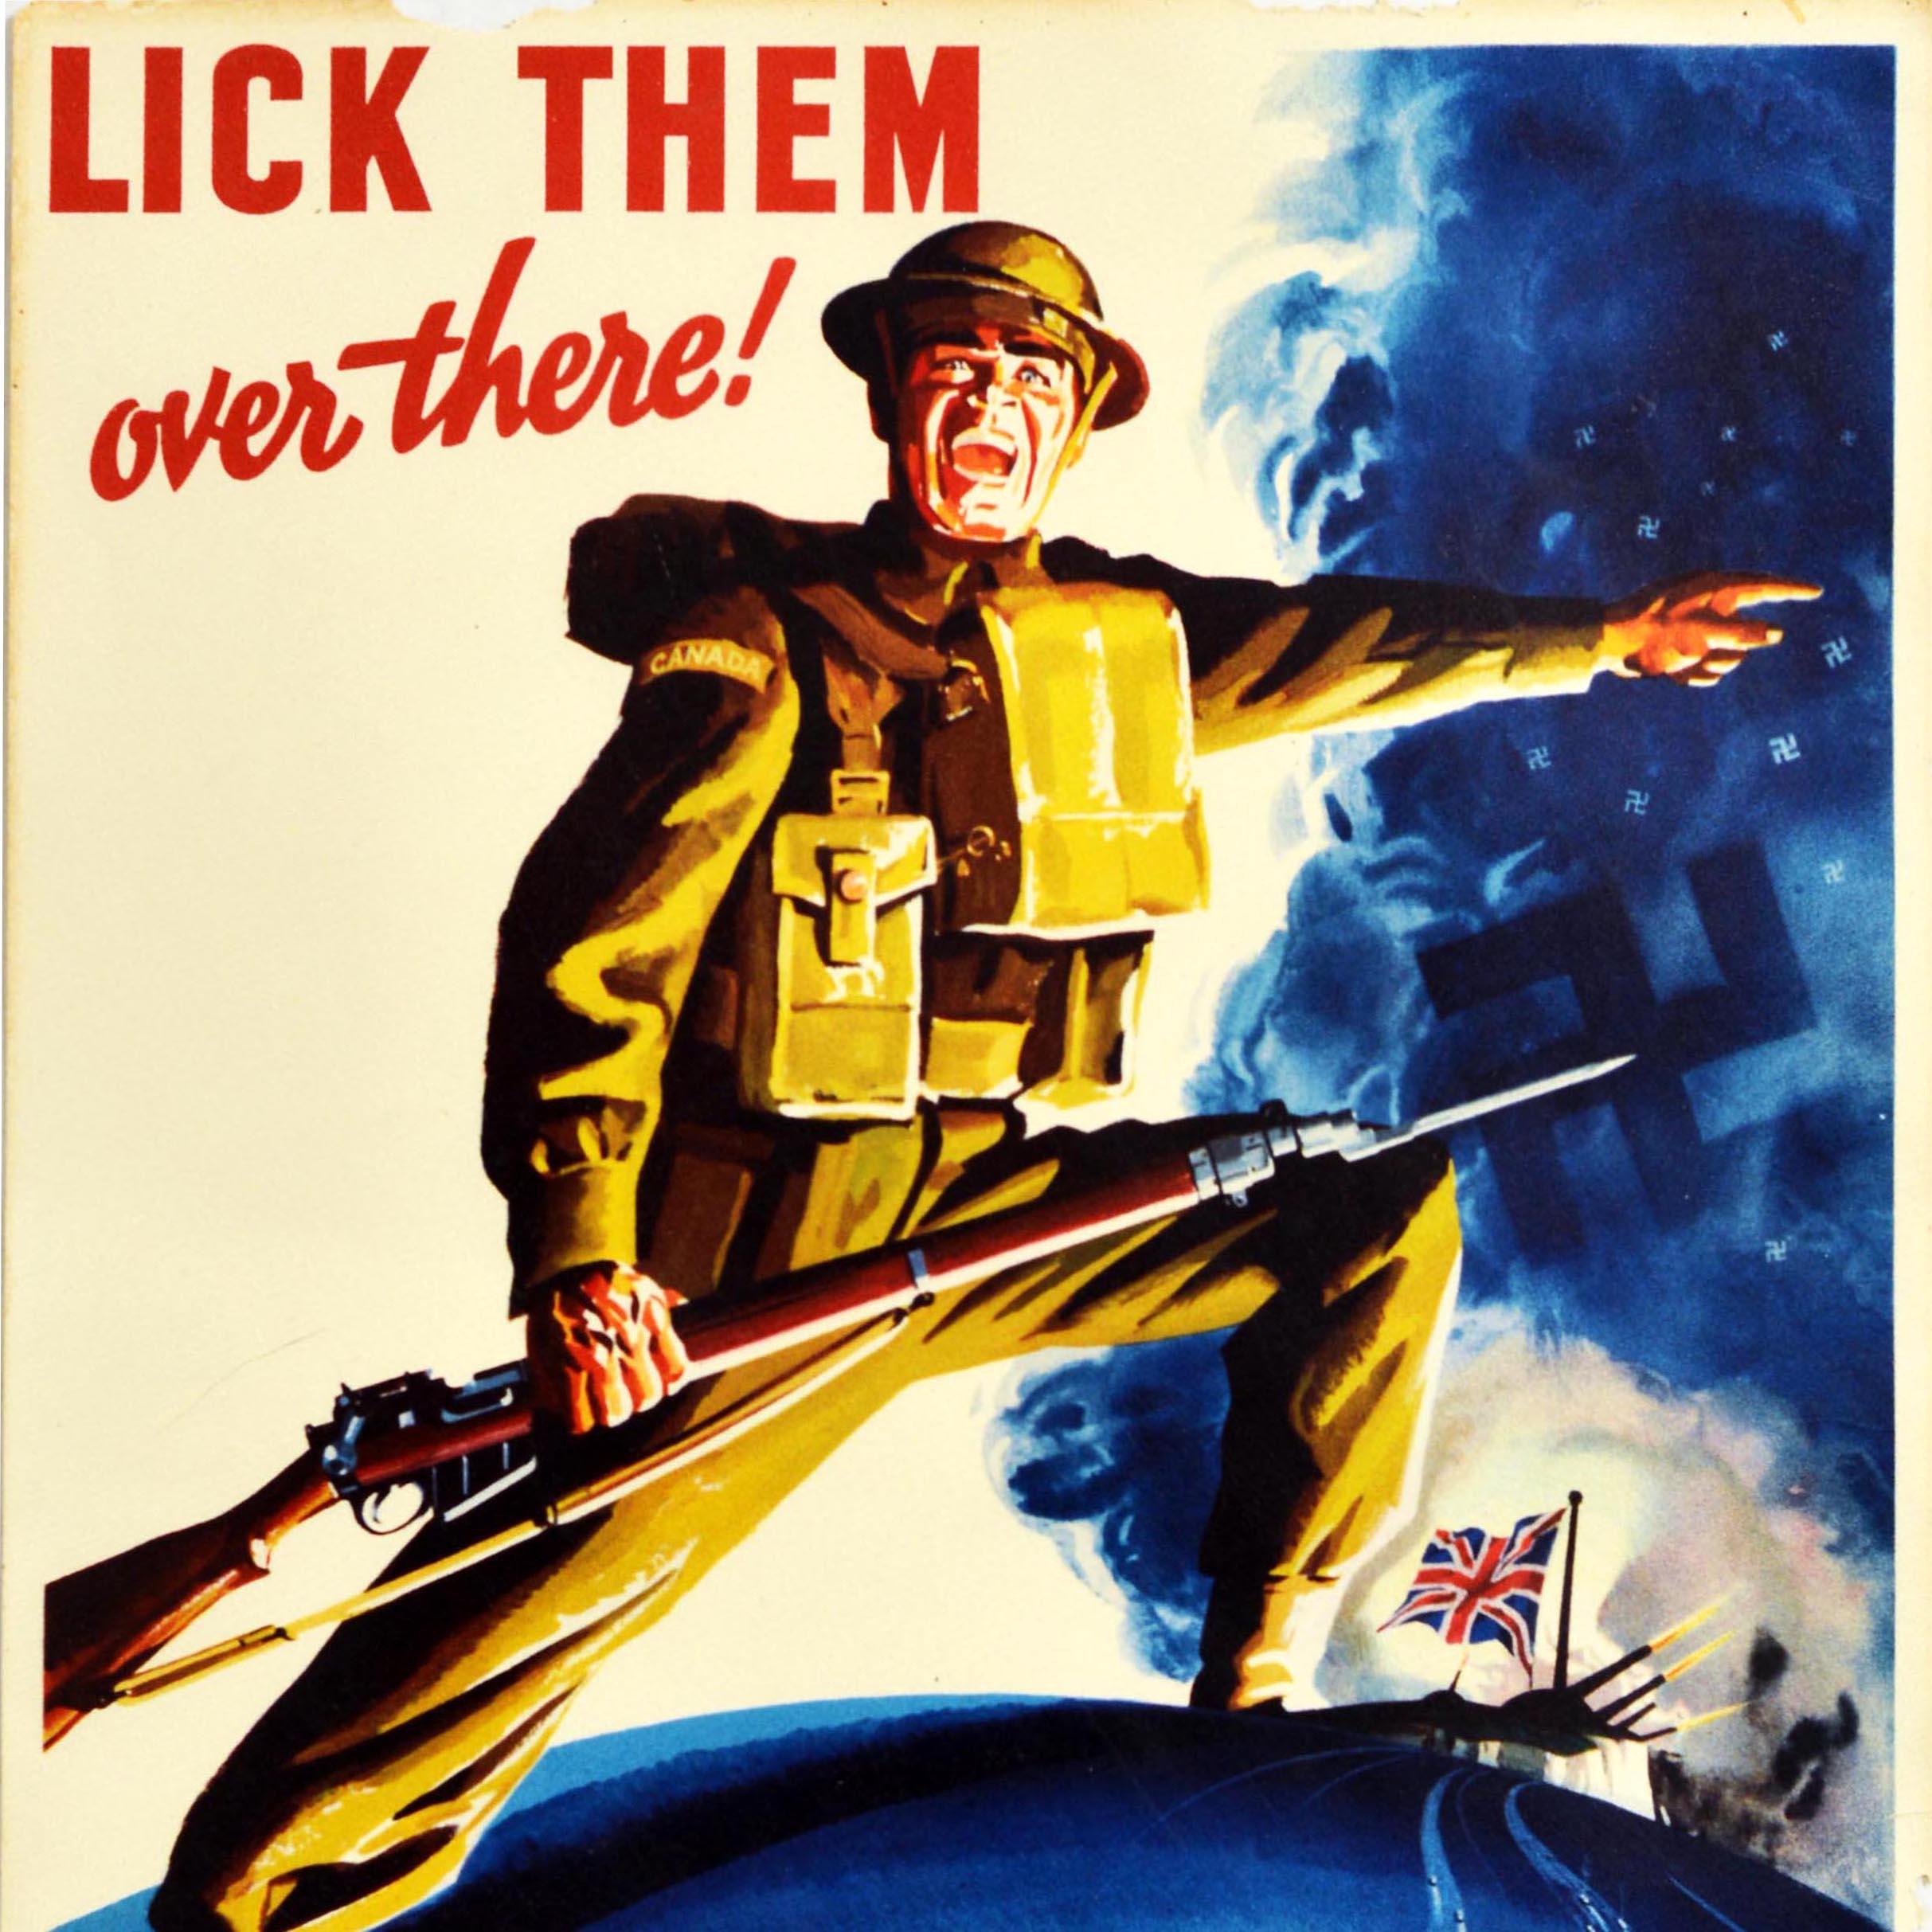 Canadian Original Vintage World War Two Poster Lick Them Over There WWII Canada Soldier For Sale